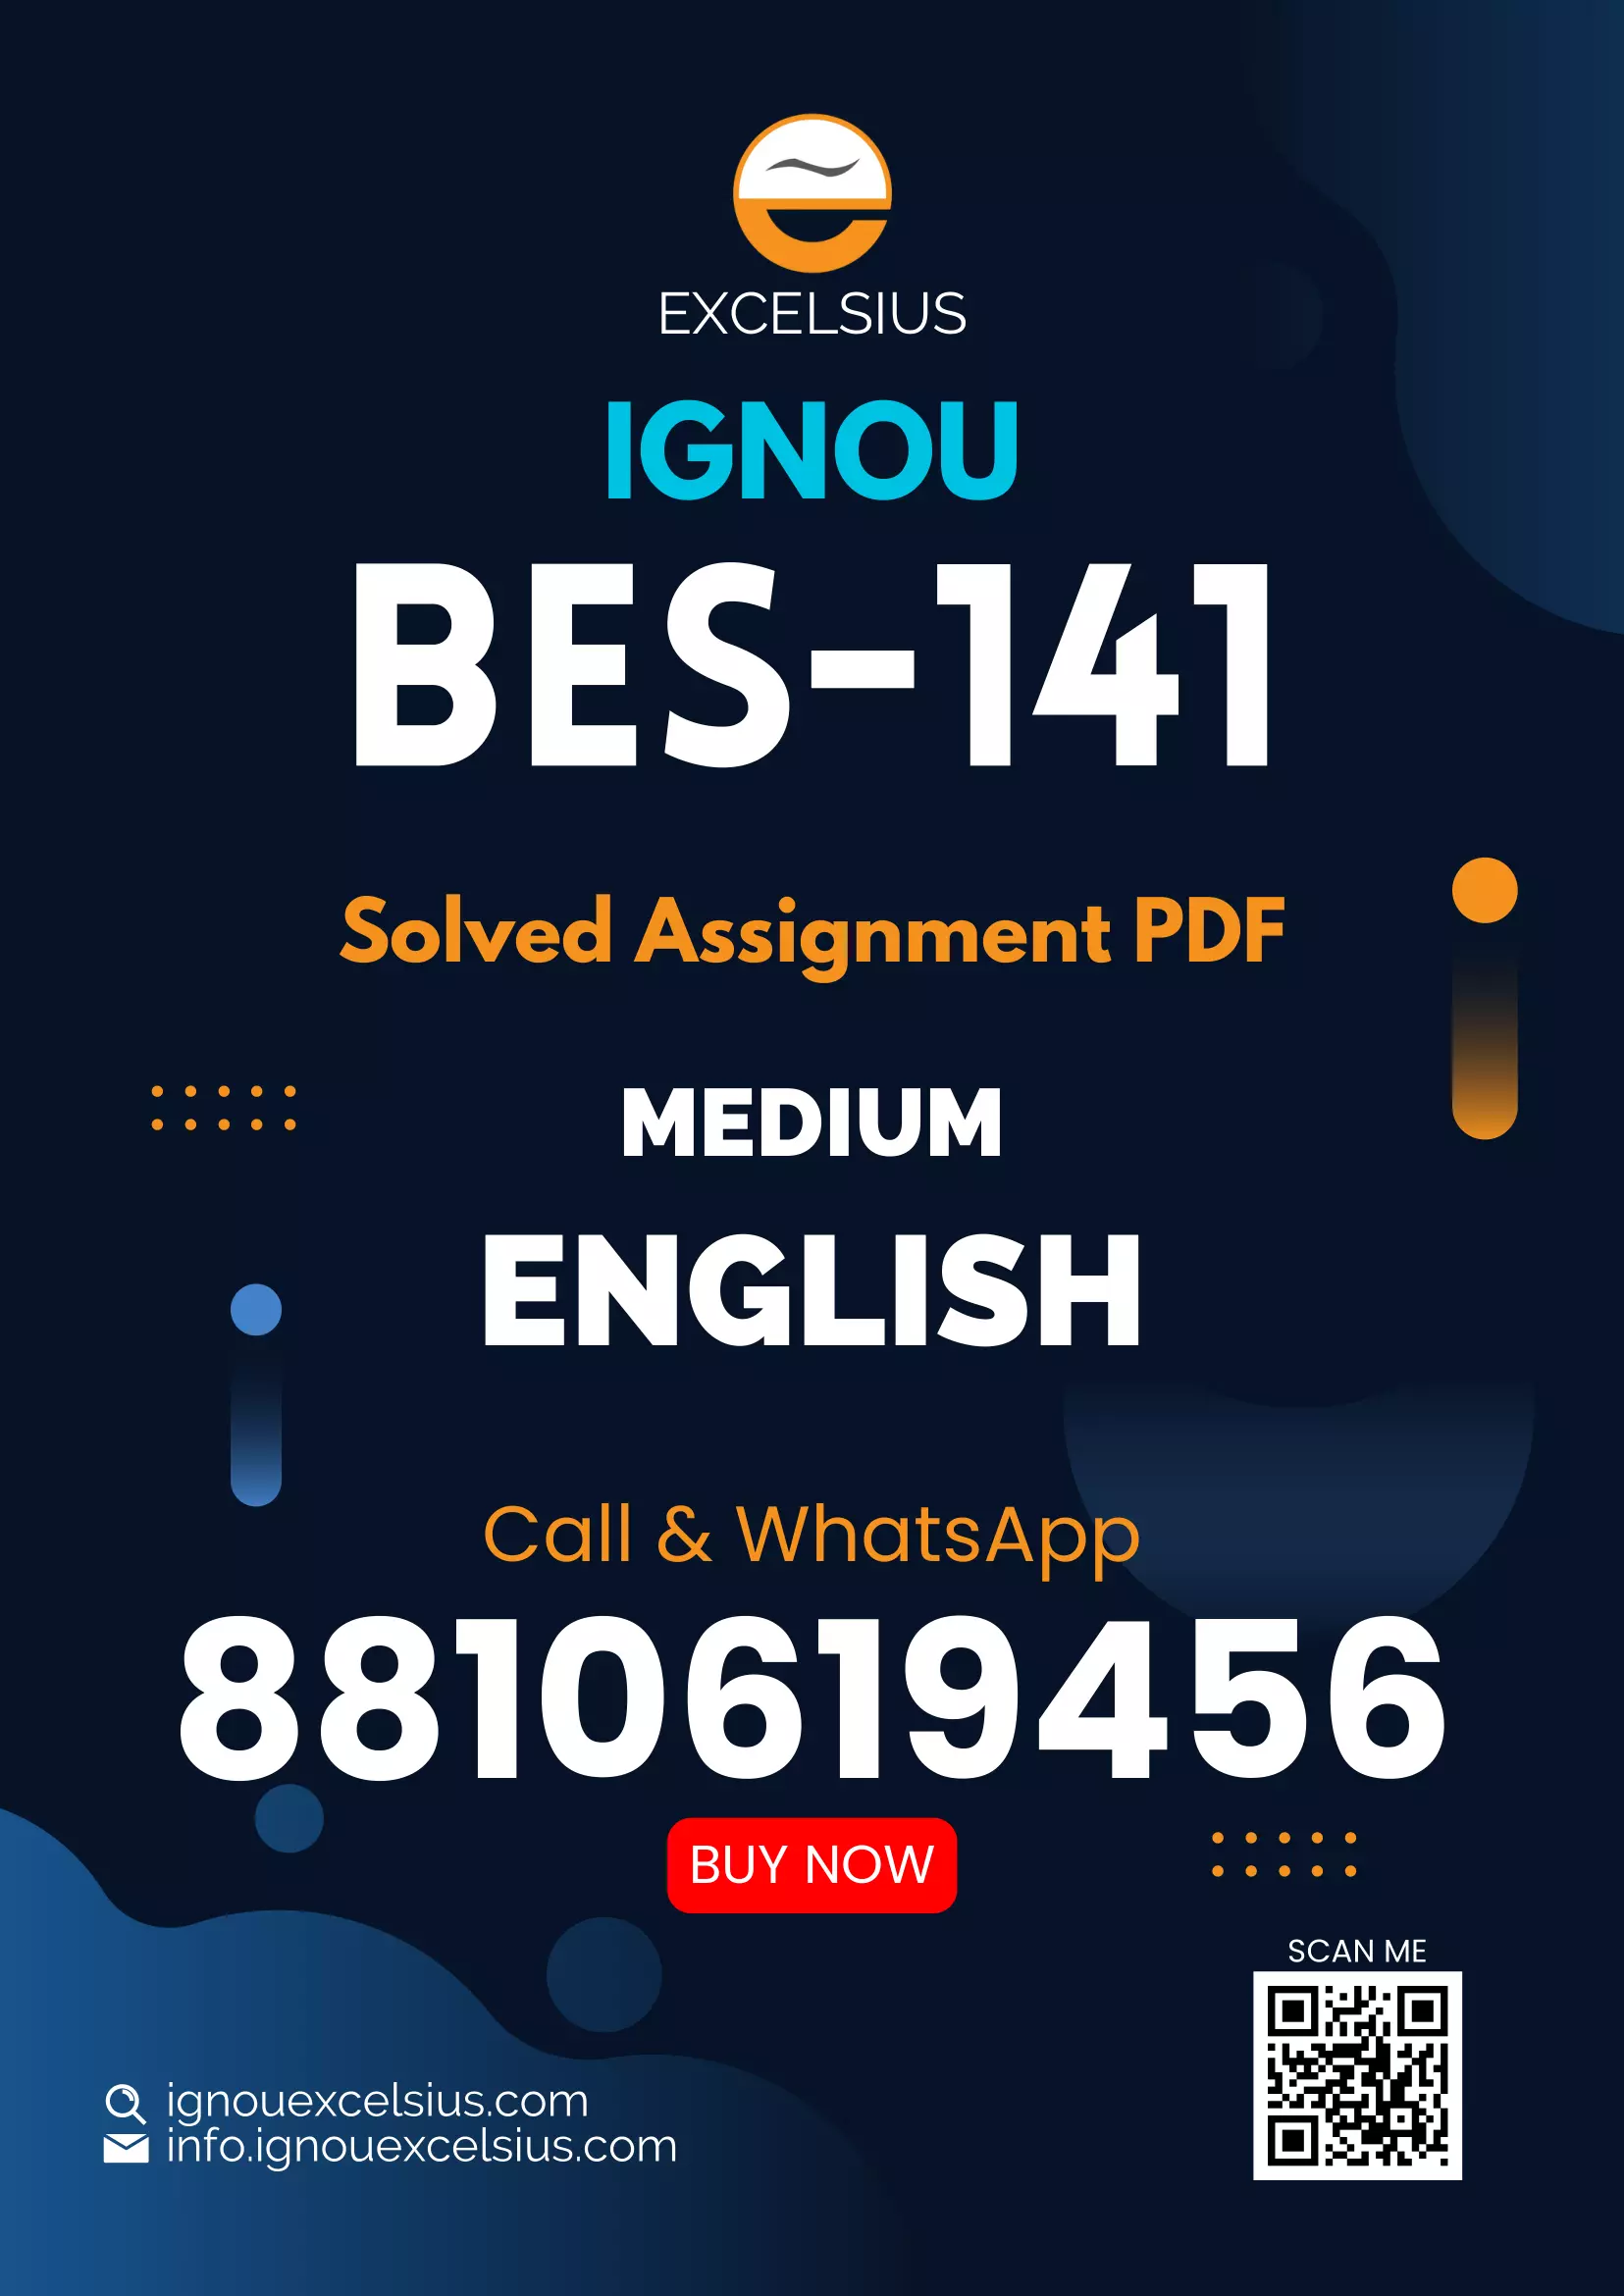 IGNOU BES-141 - Pedagogy of Science, Latest Solved Assignment-January 2021 - July 2021